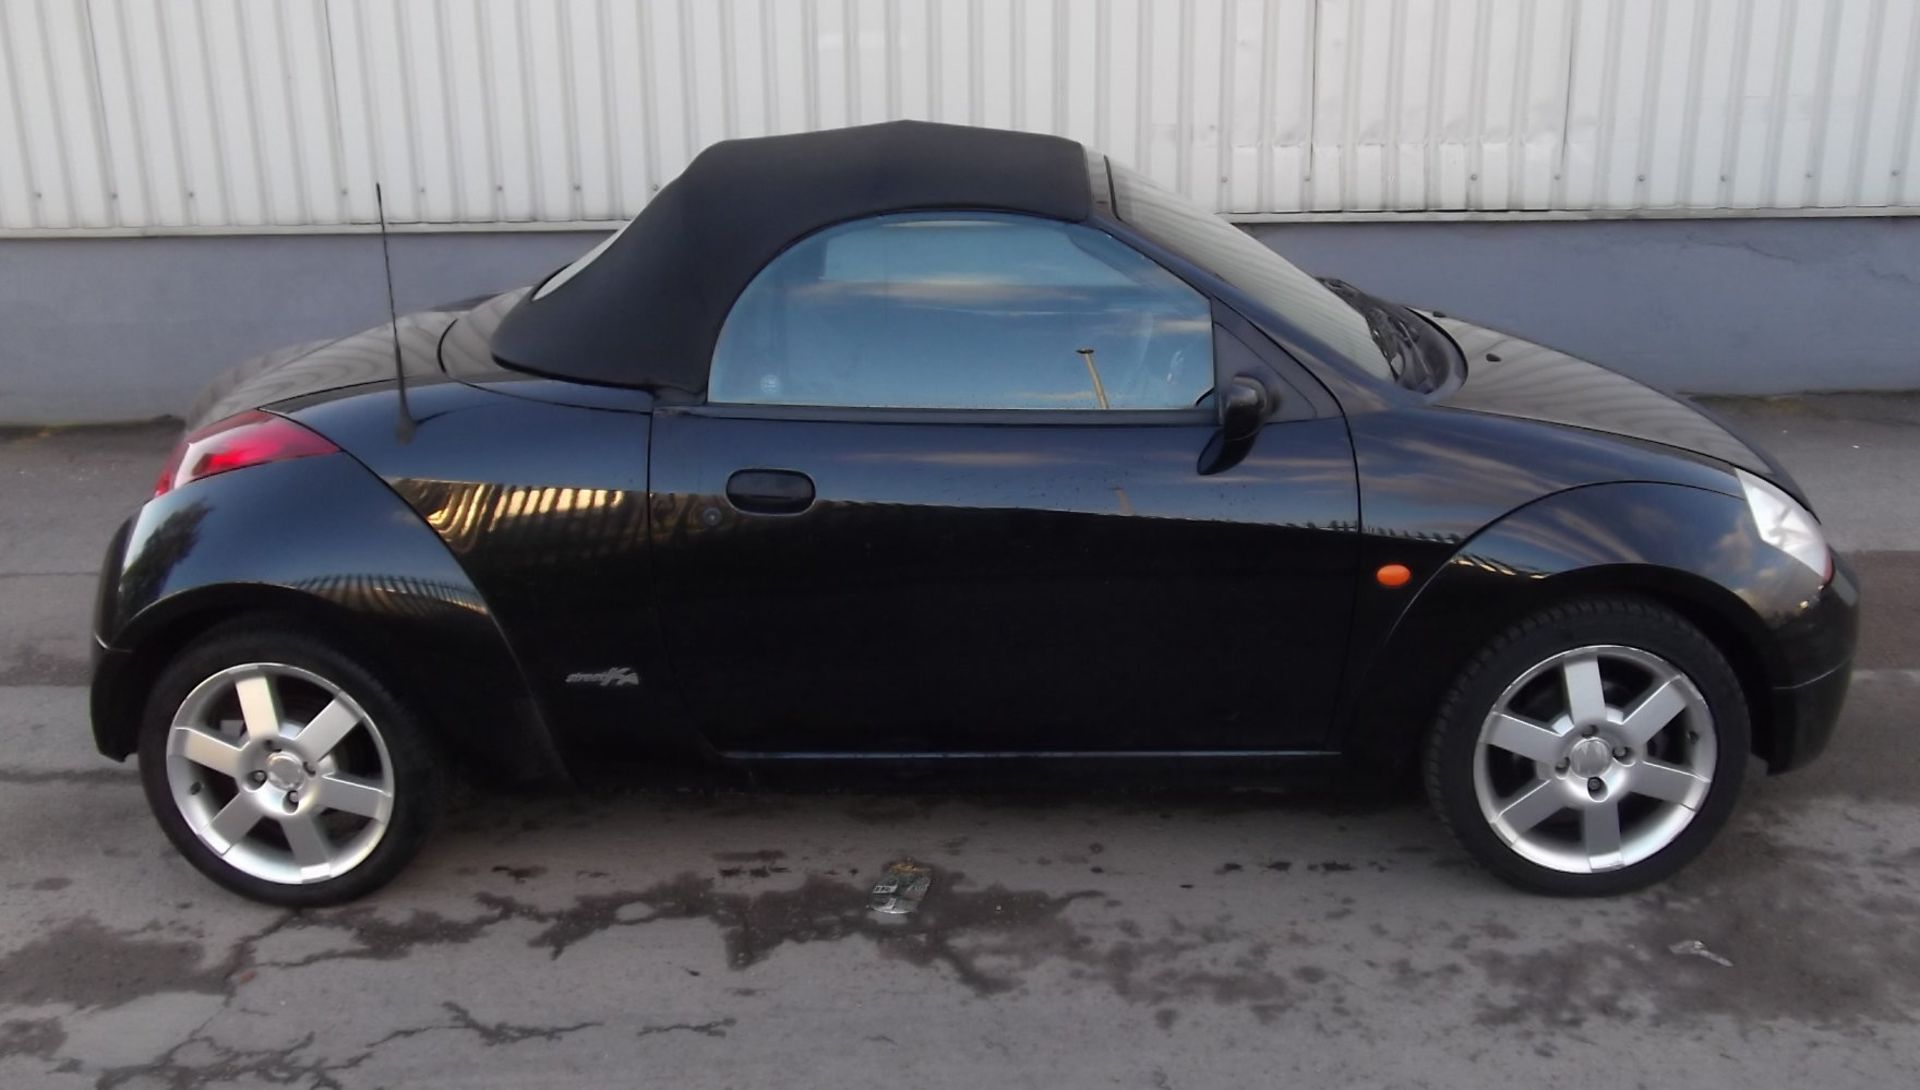 2003 Ford StreetKa 1.6 2 Door Convertible - CL505 - NO VAT ON THE HAMMER - Location: Corby, Northamp - Image 7 of 16